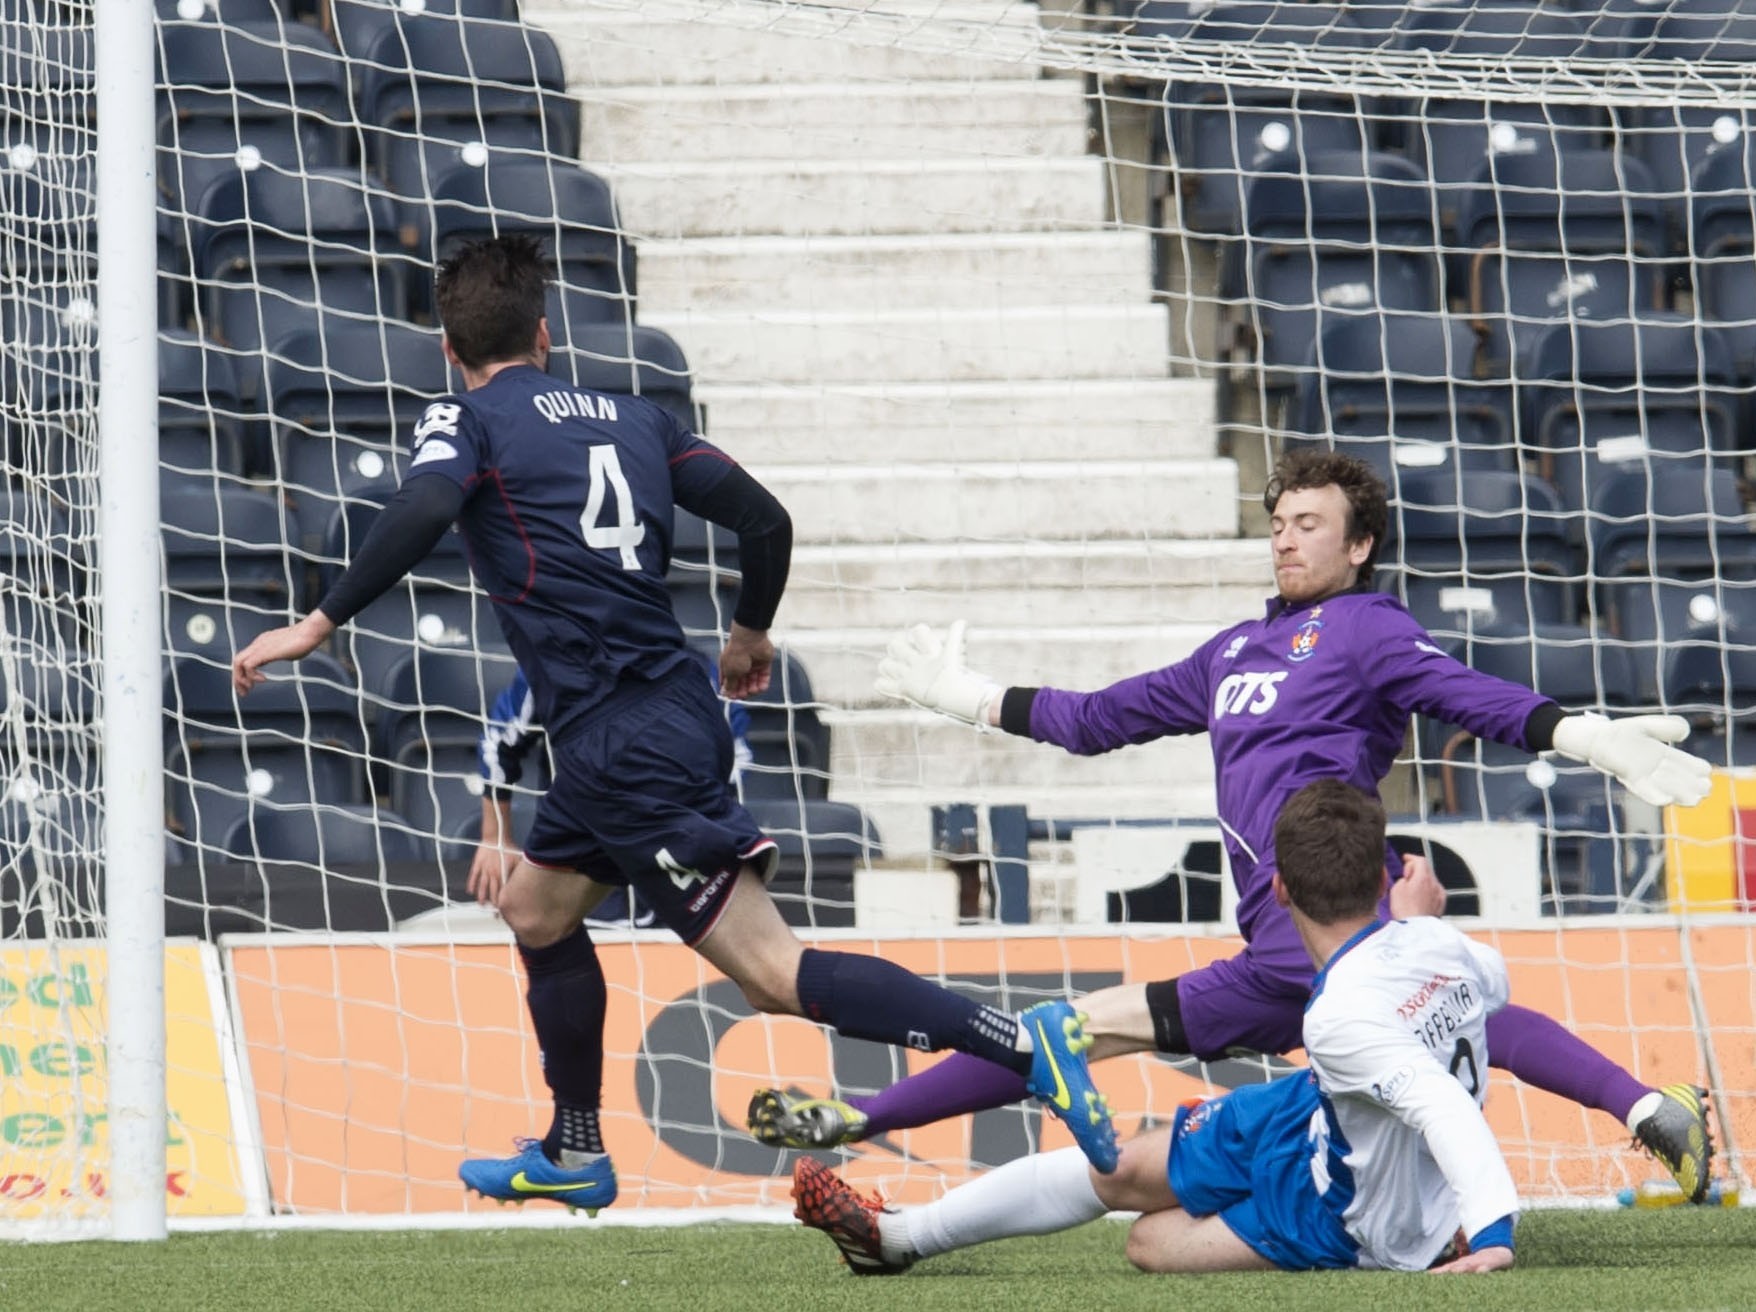 Quinn nets the winner this afternoon against Kilmarnock